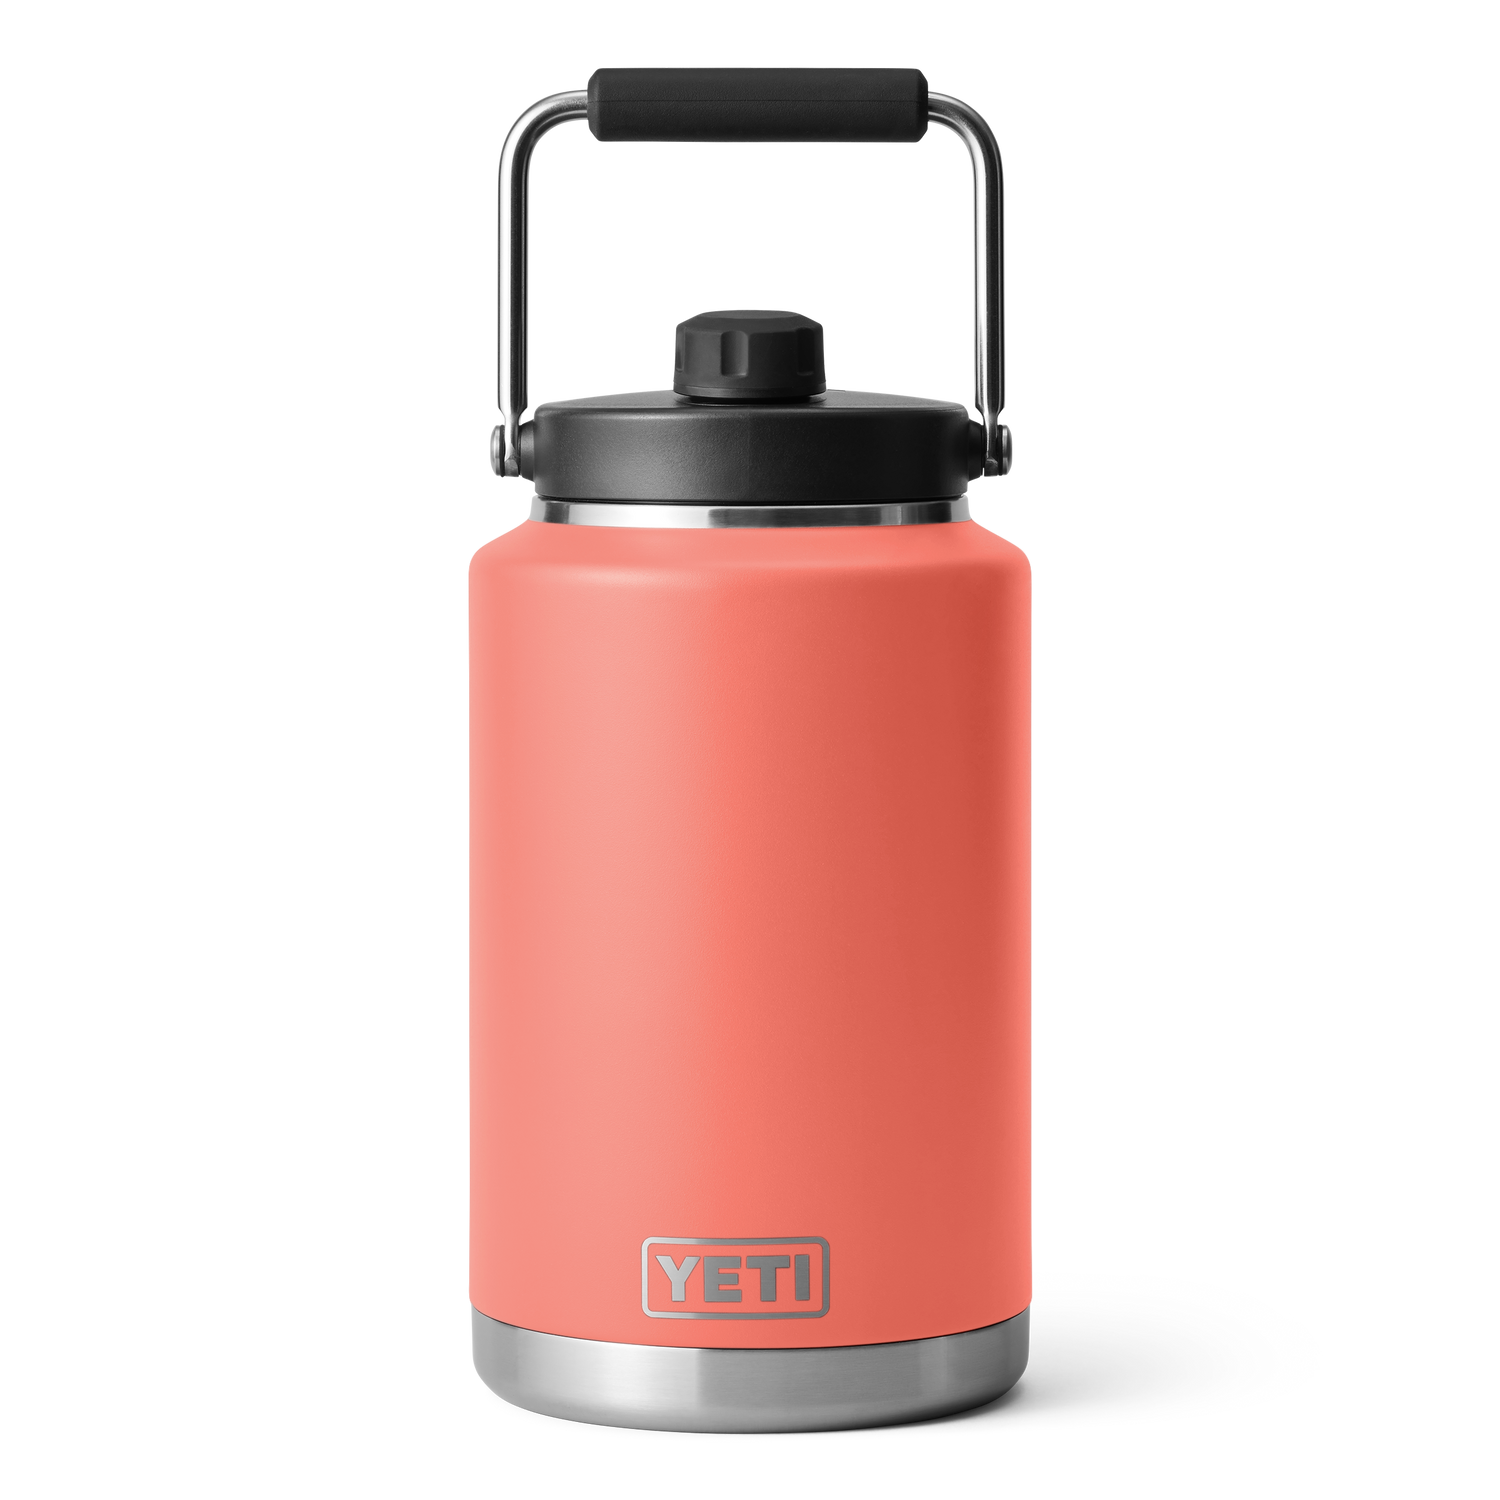 OUT OF STOCK / PRE-ORDER Shaker Bottle Red with Flat Cap 16